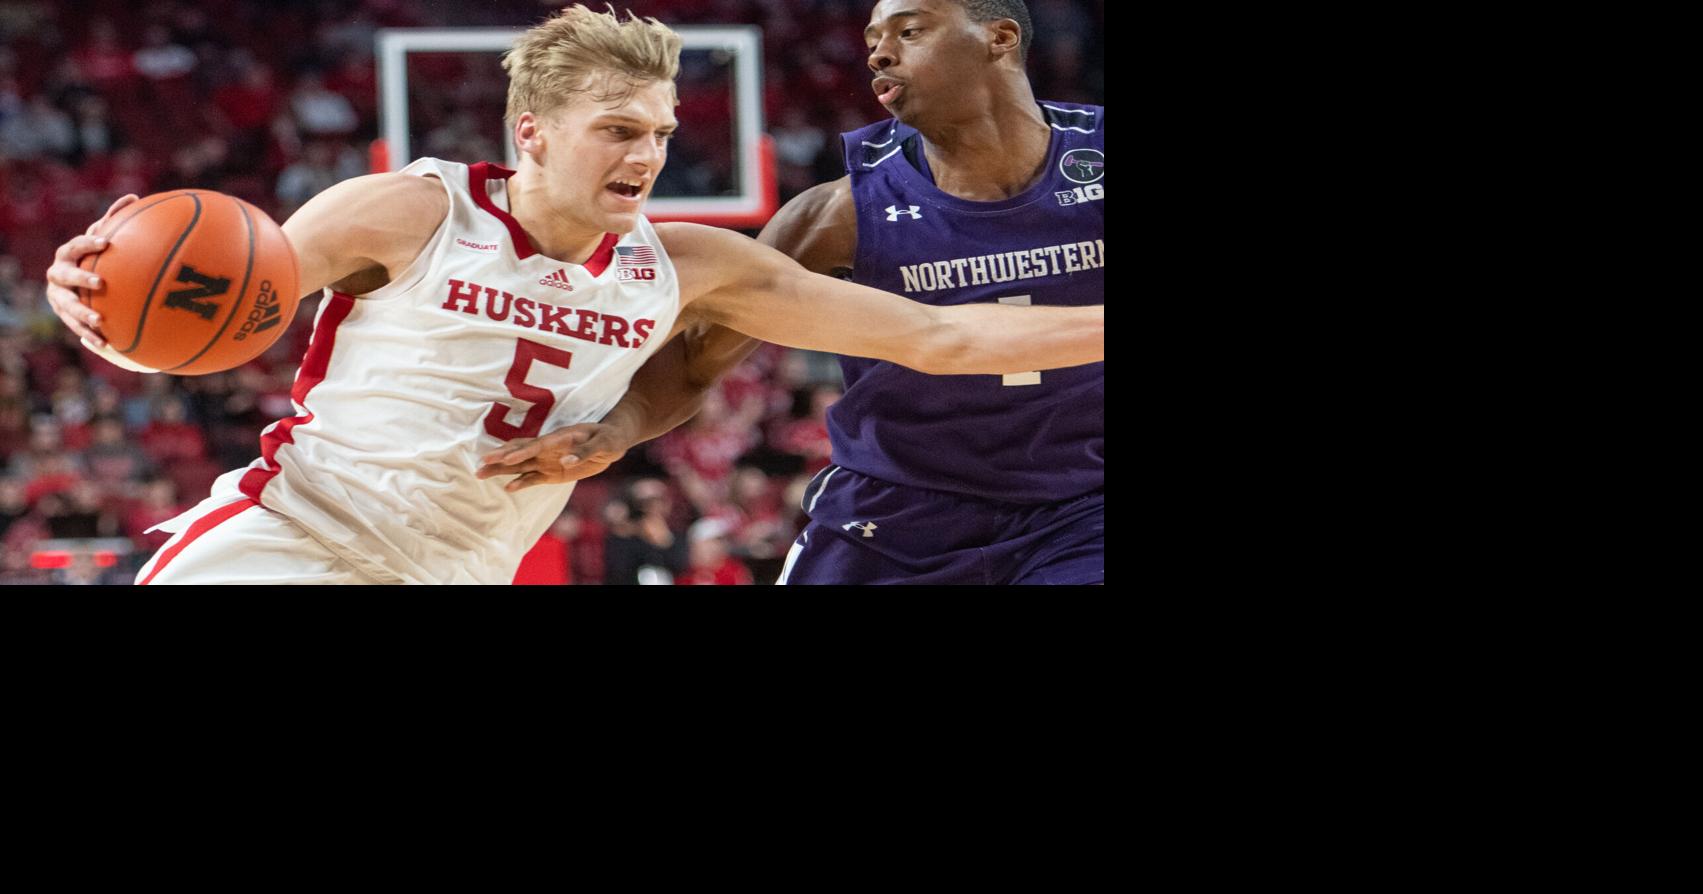 Five Huskers to Play in NBA Summer Leagues - University of